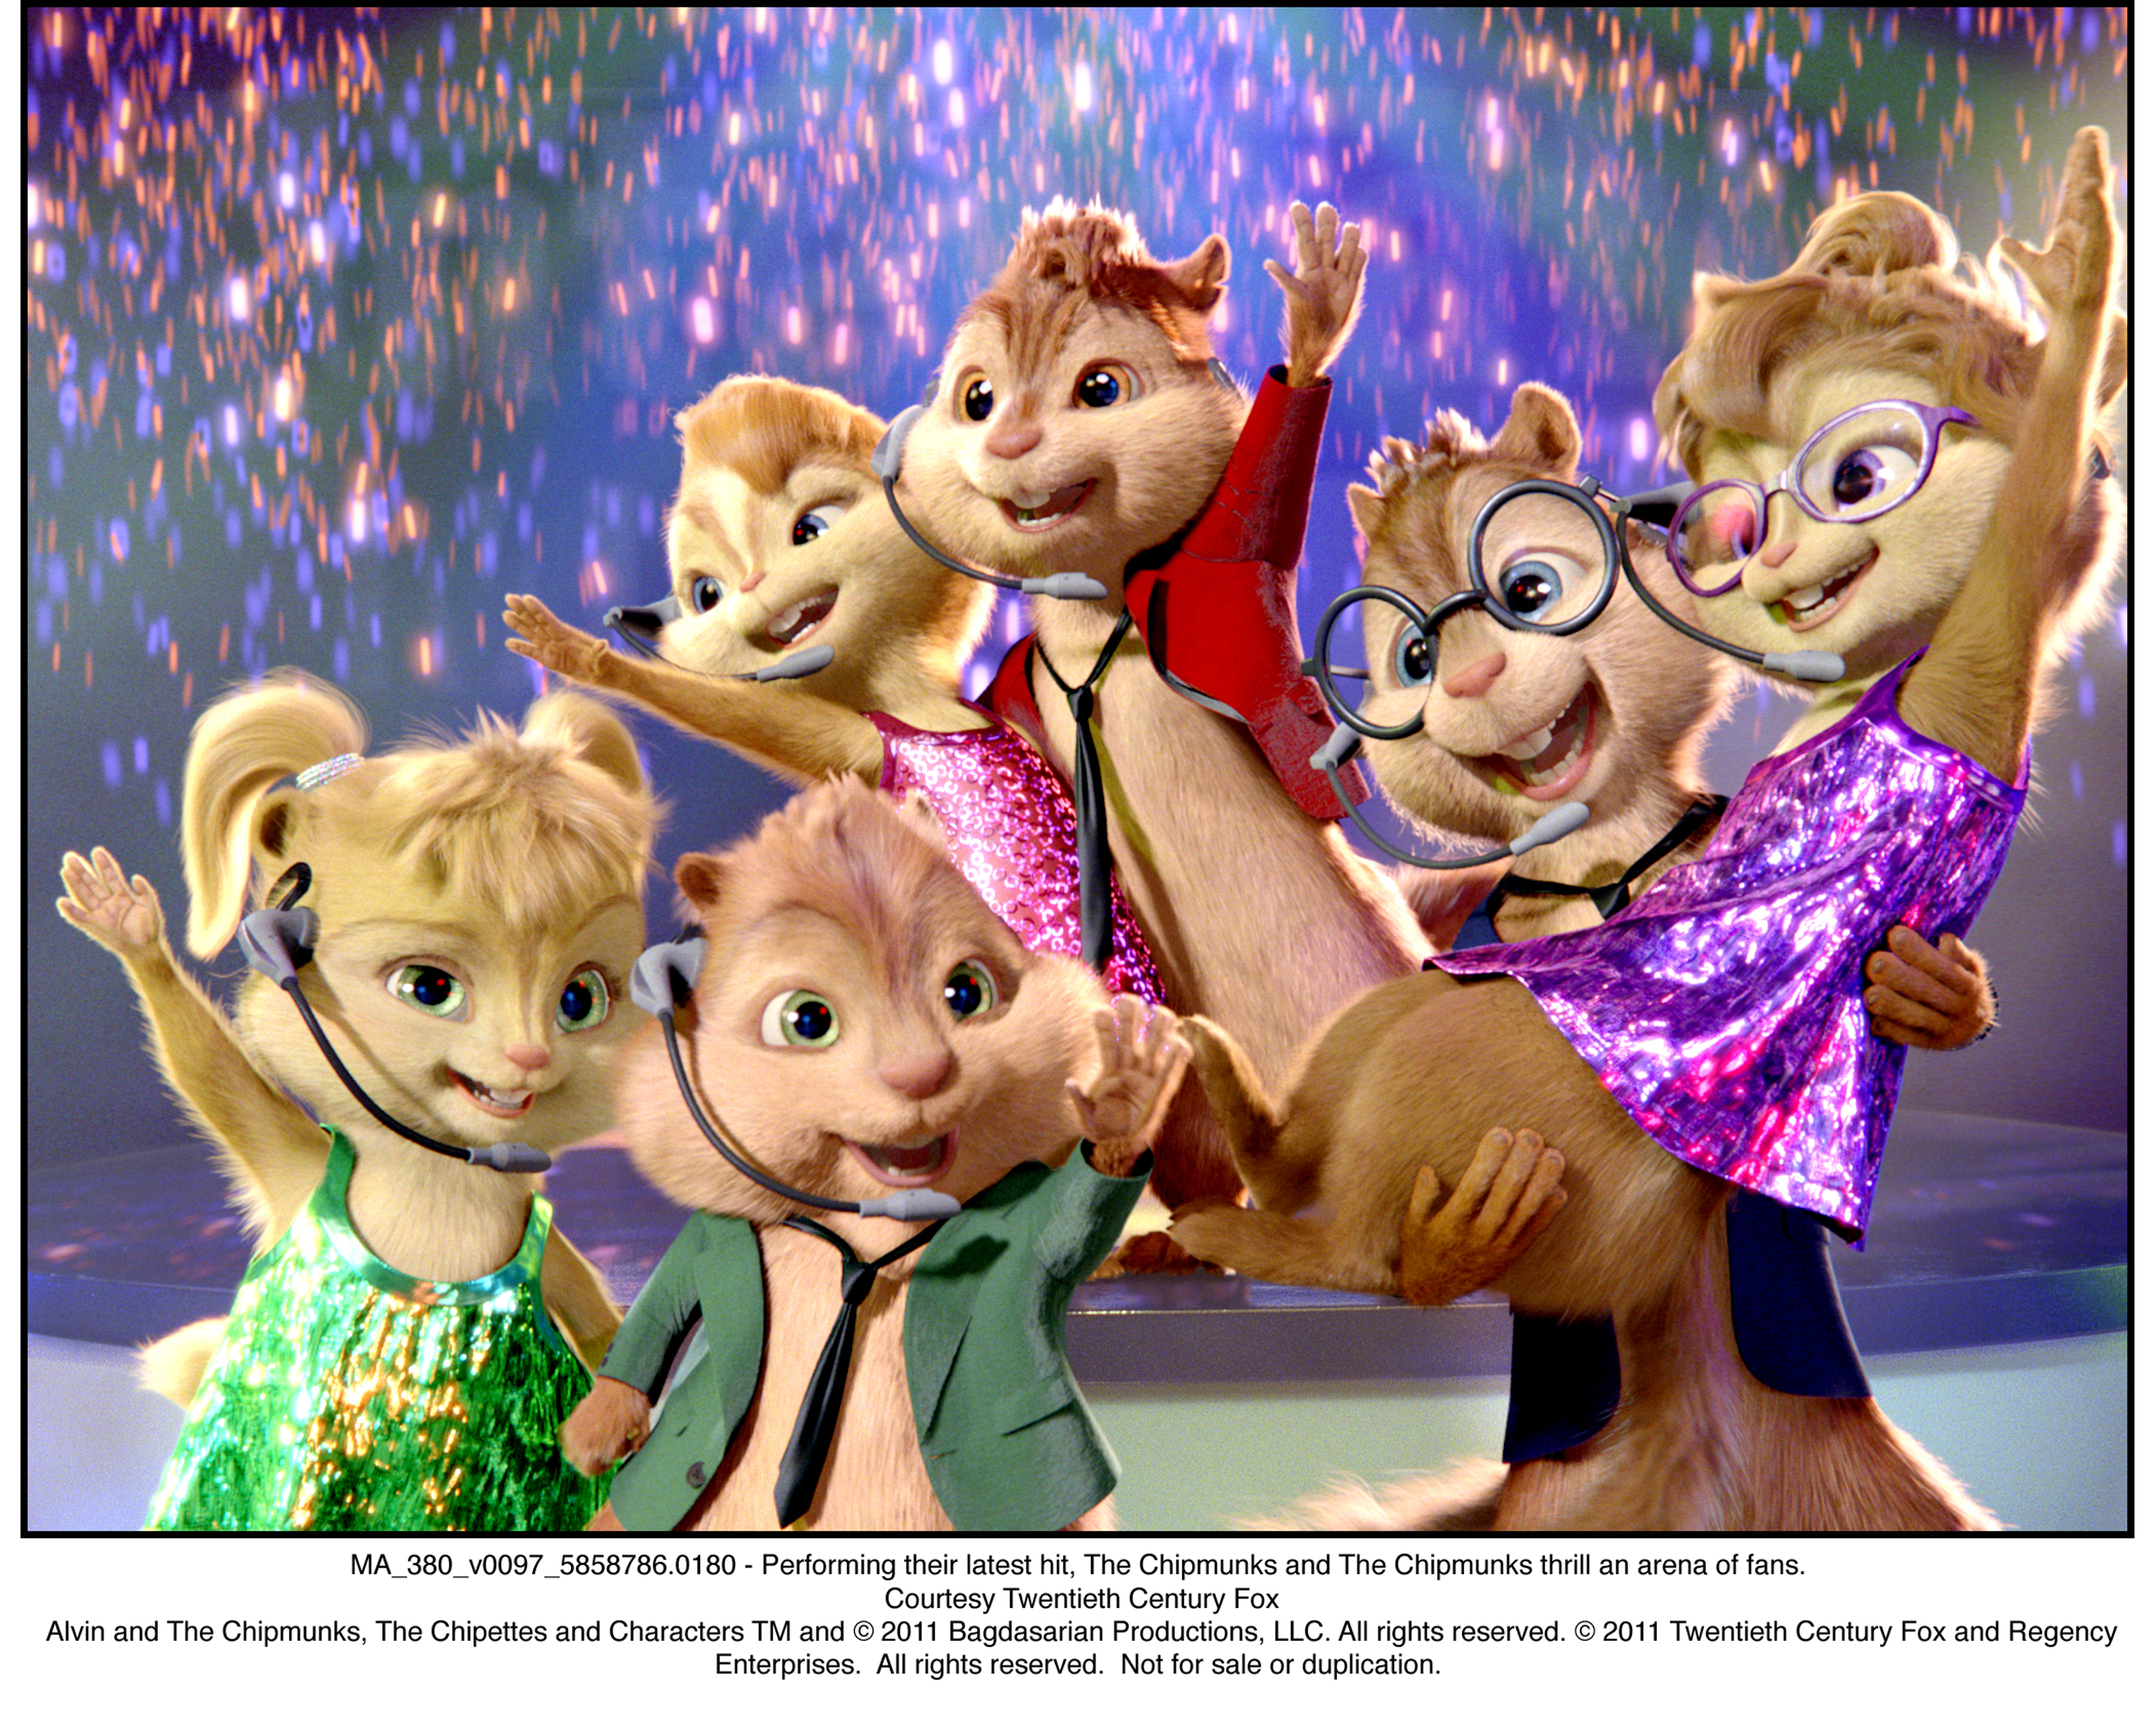 ‘ALVIN AND THE CHIPMUNKS’ AND ‘RIO’ FILMS COME TO LIFE ON STAGE! 1